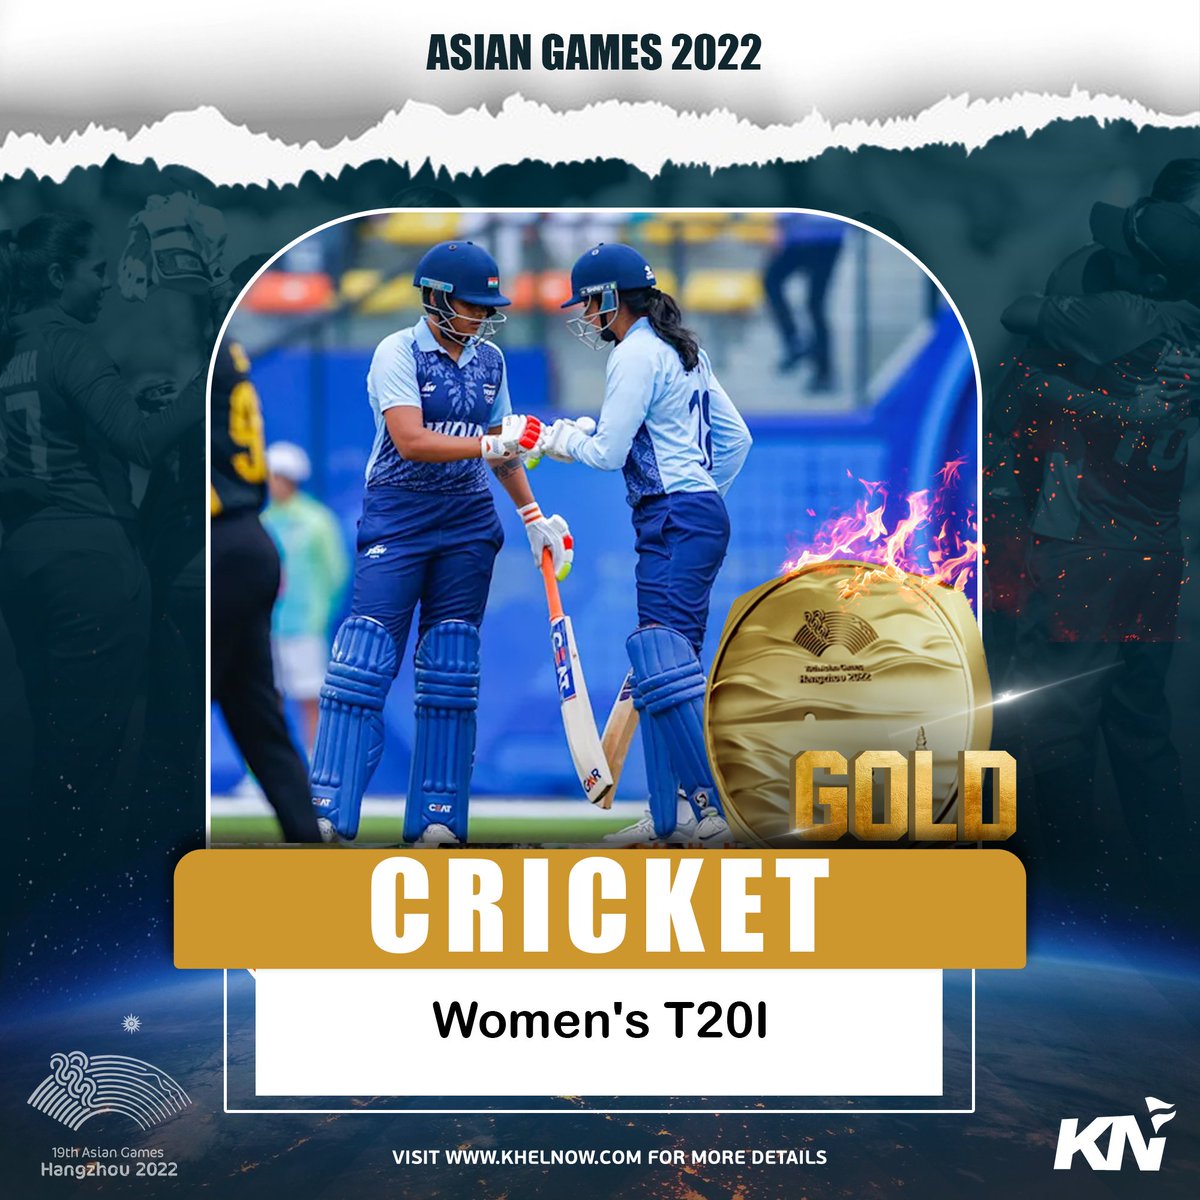 India women's cricket team win Gold medal in Asian Games after defeating Sri Lanka by 19 runs in the final

#AsianGames #AsianGames2022 #indianwomenscricketteam #BCCI #BCCIWomen #CricketinAsianGames #India #Cricket #INDvsSL